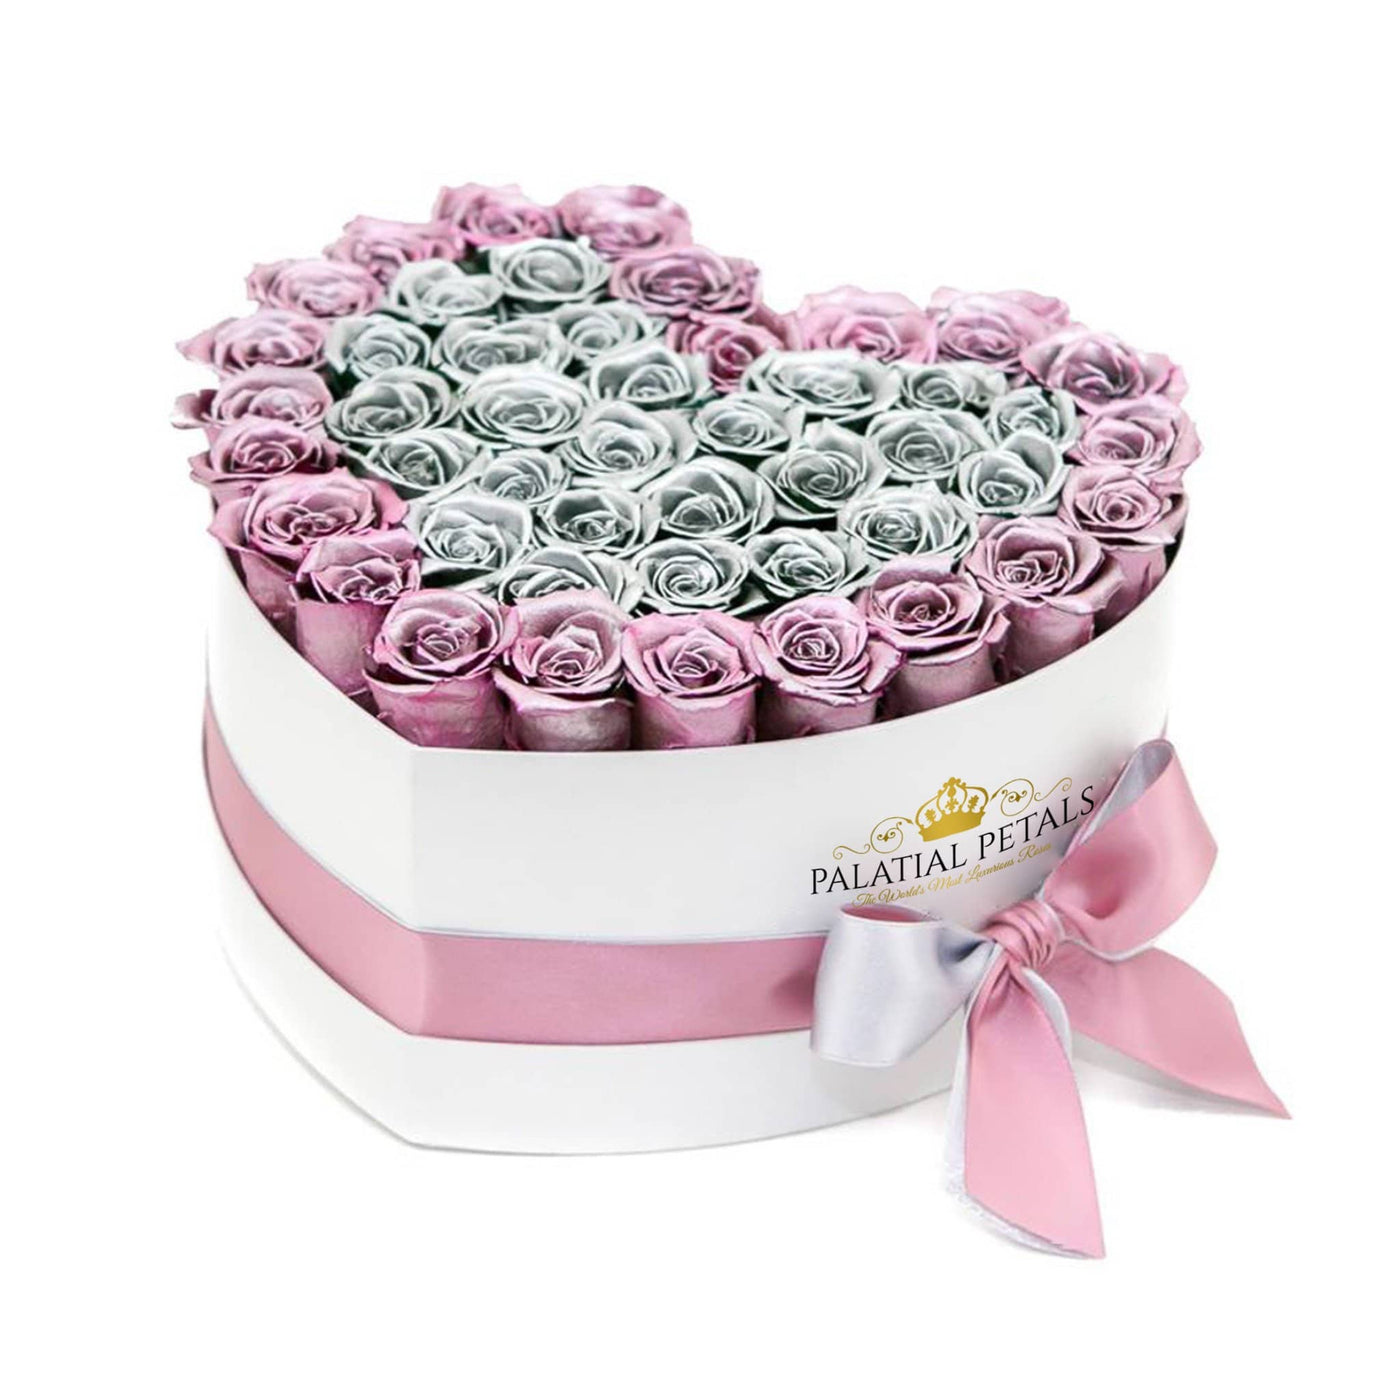 Metallic Pink & Silver Roses That Last A Year - Love Heart Rose Box